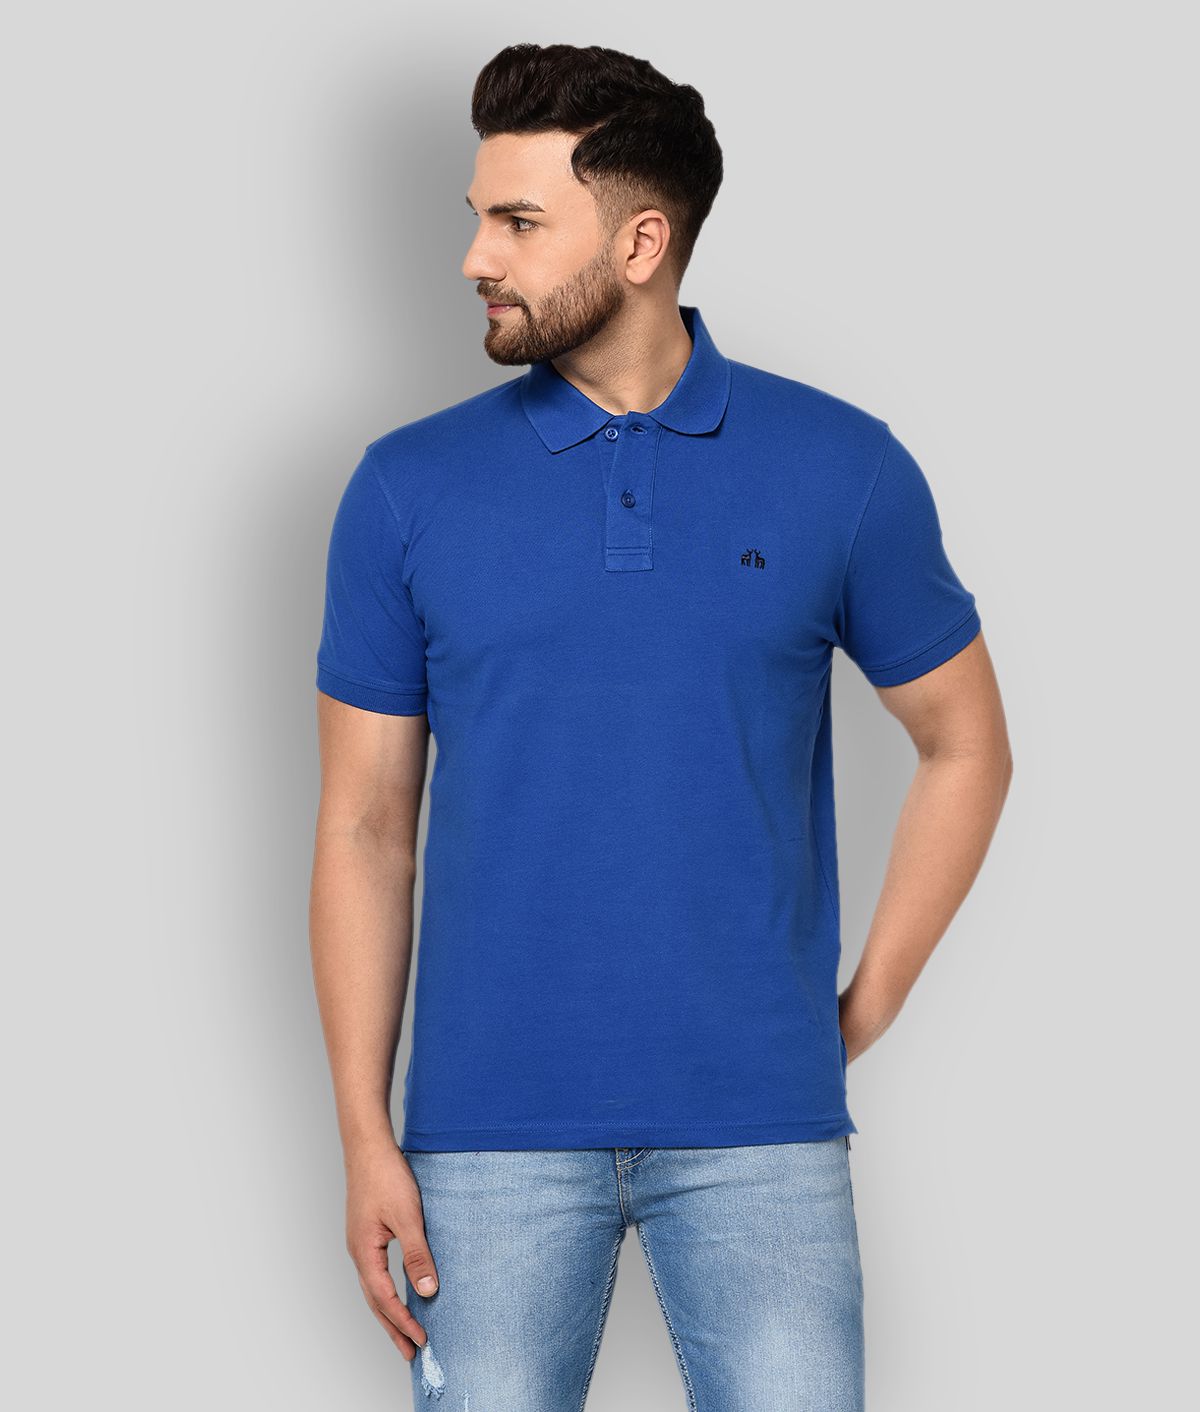     			98 Degree North - Blue Cotton Blend Slim Fit Men's Polo T shirt ( Pack of 1 )